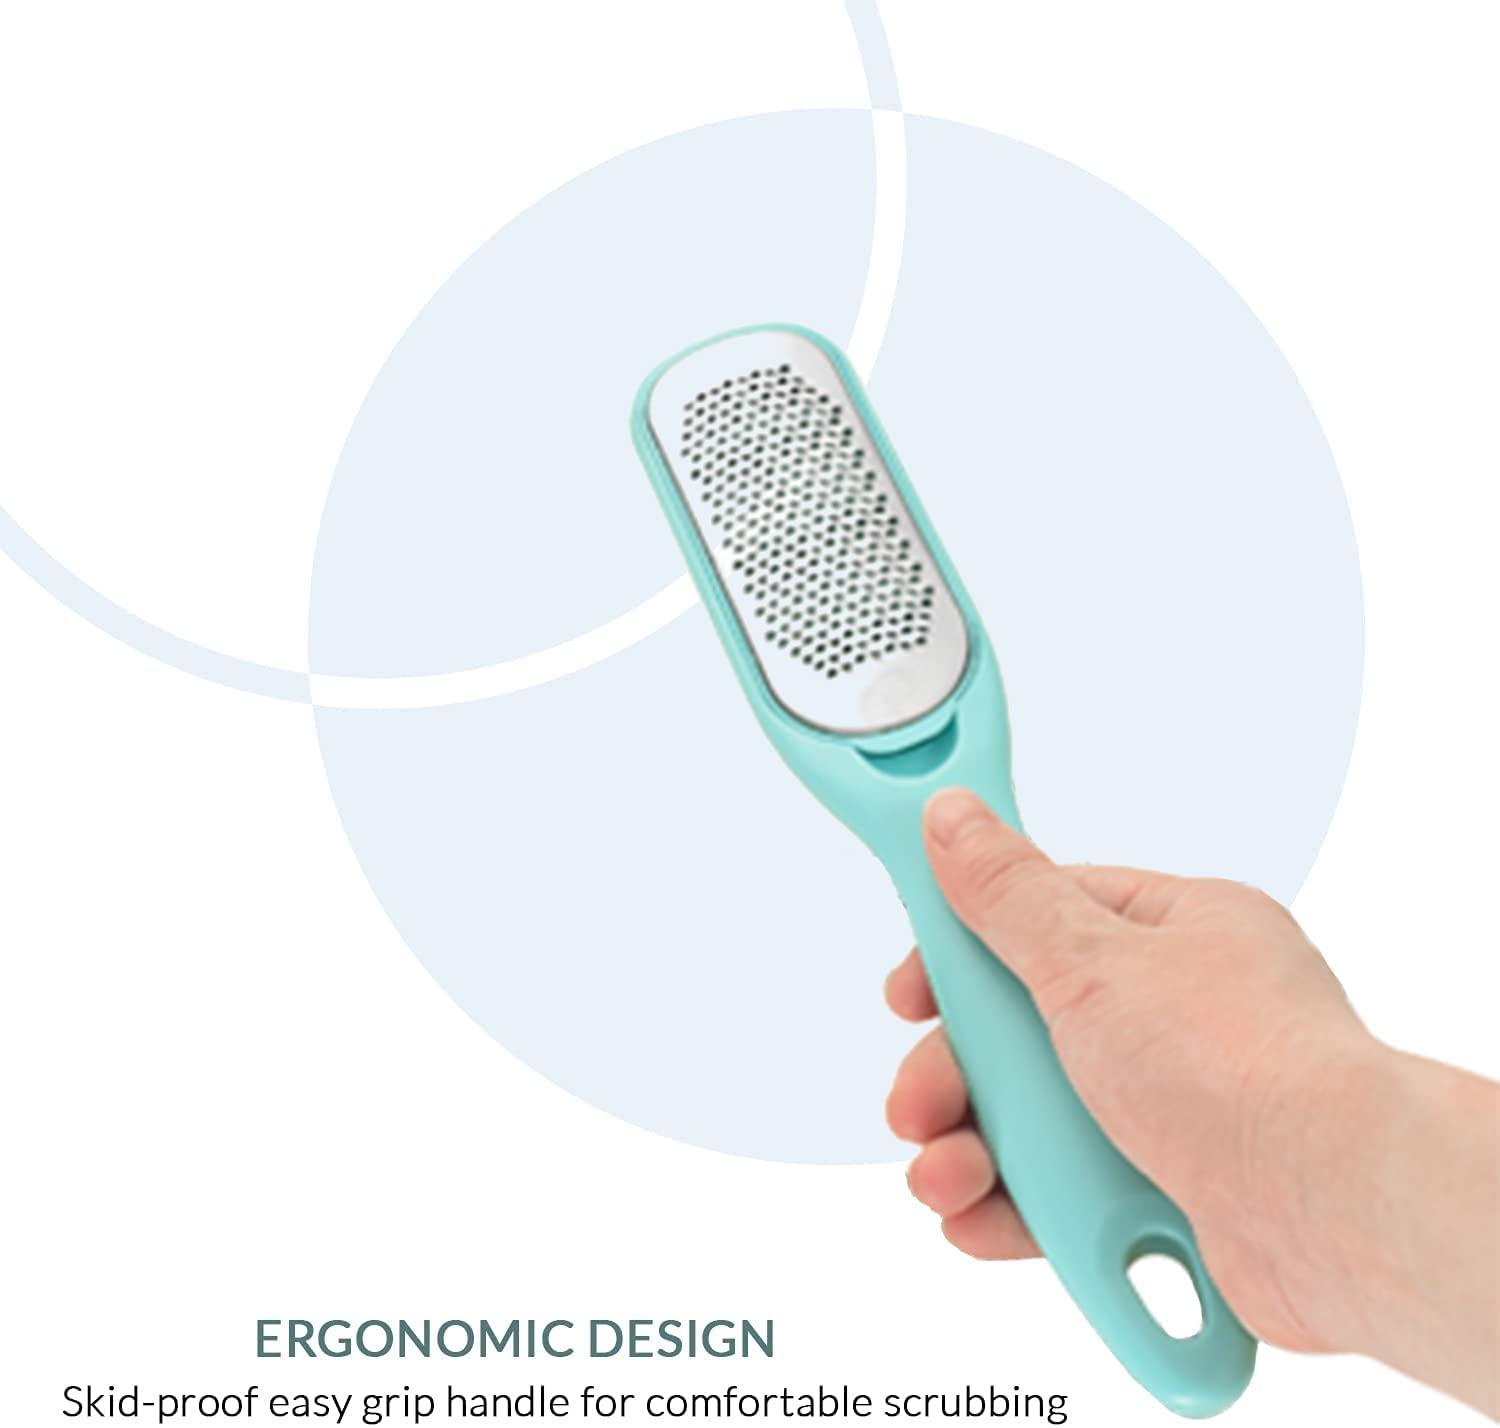 Callus Remover for Feet  Double-Sided Foot Scrub -Foot File -Dead